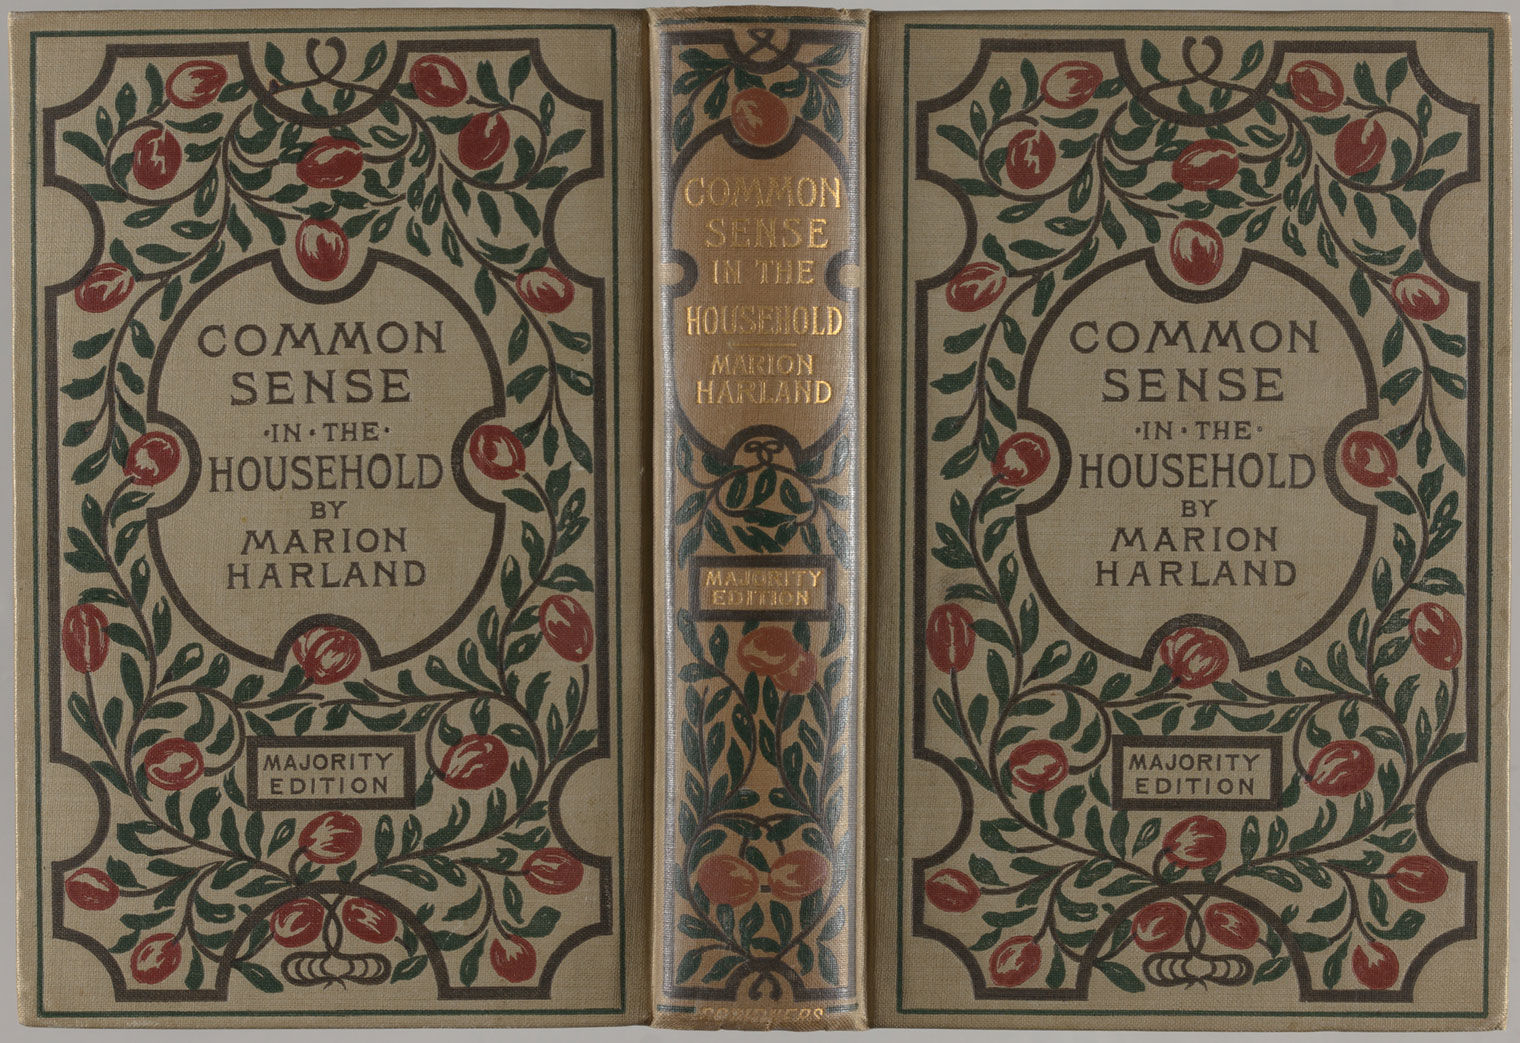 Image of the cover of a book titled "Common Sense in the Household"; pea green cloth with title and author stamped in black in center surrounded by intertwined leafy branches with round blossoms stamped in black, green, and red, with gold foil accents on spine